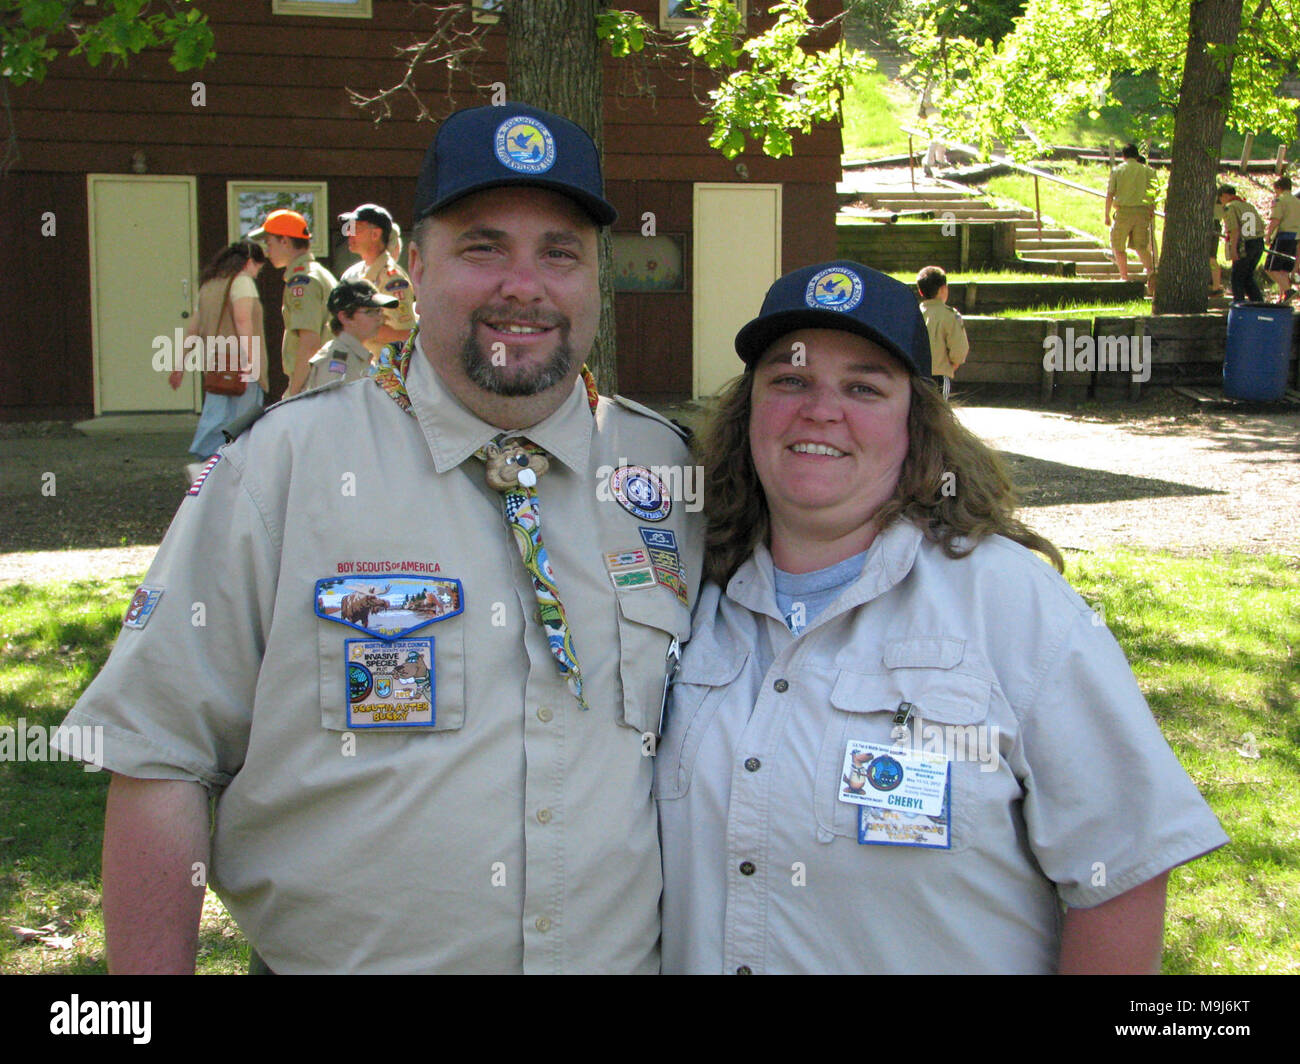 Mr. and Mrs. Scoutmaster Bucky volunteer with the USFWS and helped lead the effort to remove invasive species with the Boy Scouts. Photo by Scott Glup/USFWS. Stock Photo